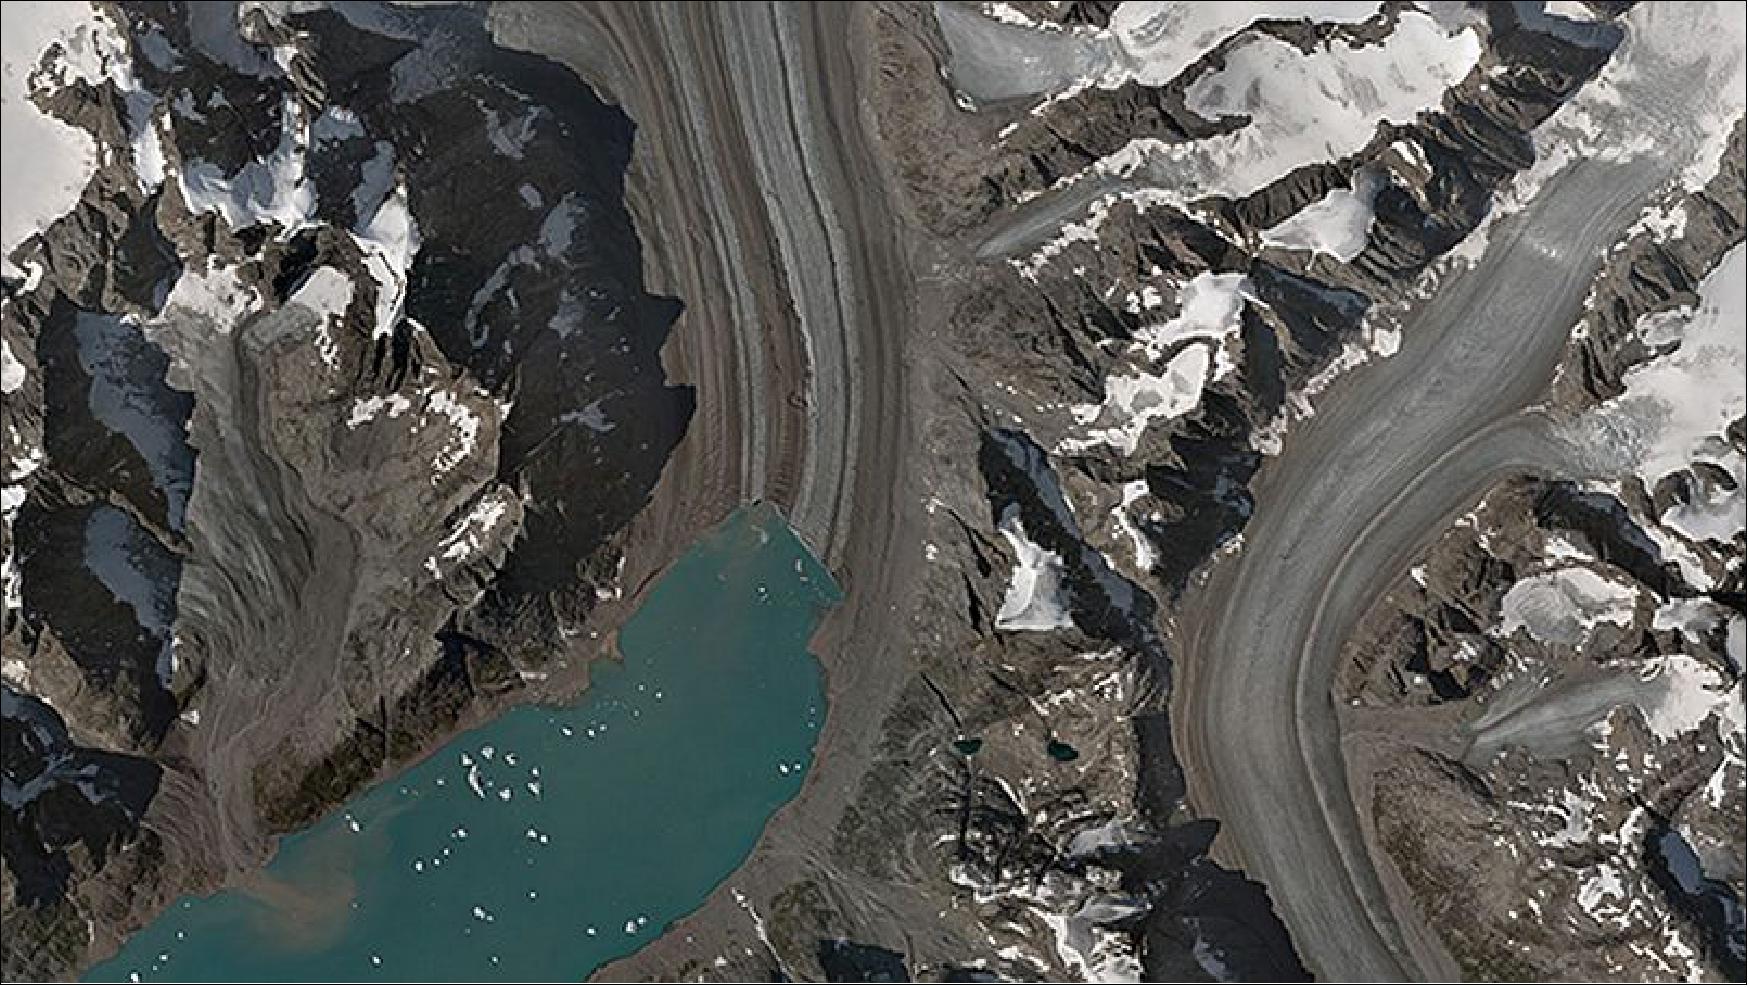 Figure 30: SkySat-1 image of the Helkeim Glacier in Greenland, acquired on Aug. 18, 2014 (image credit: Skybox Imaging) 60)